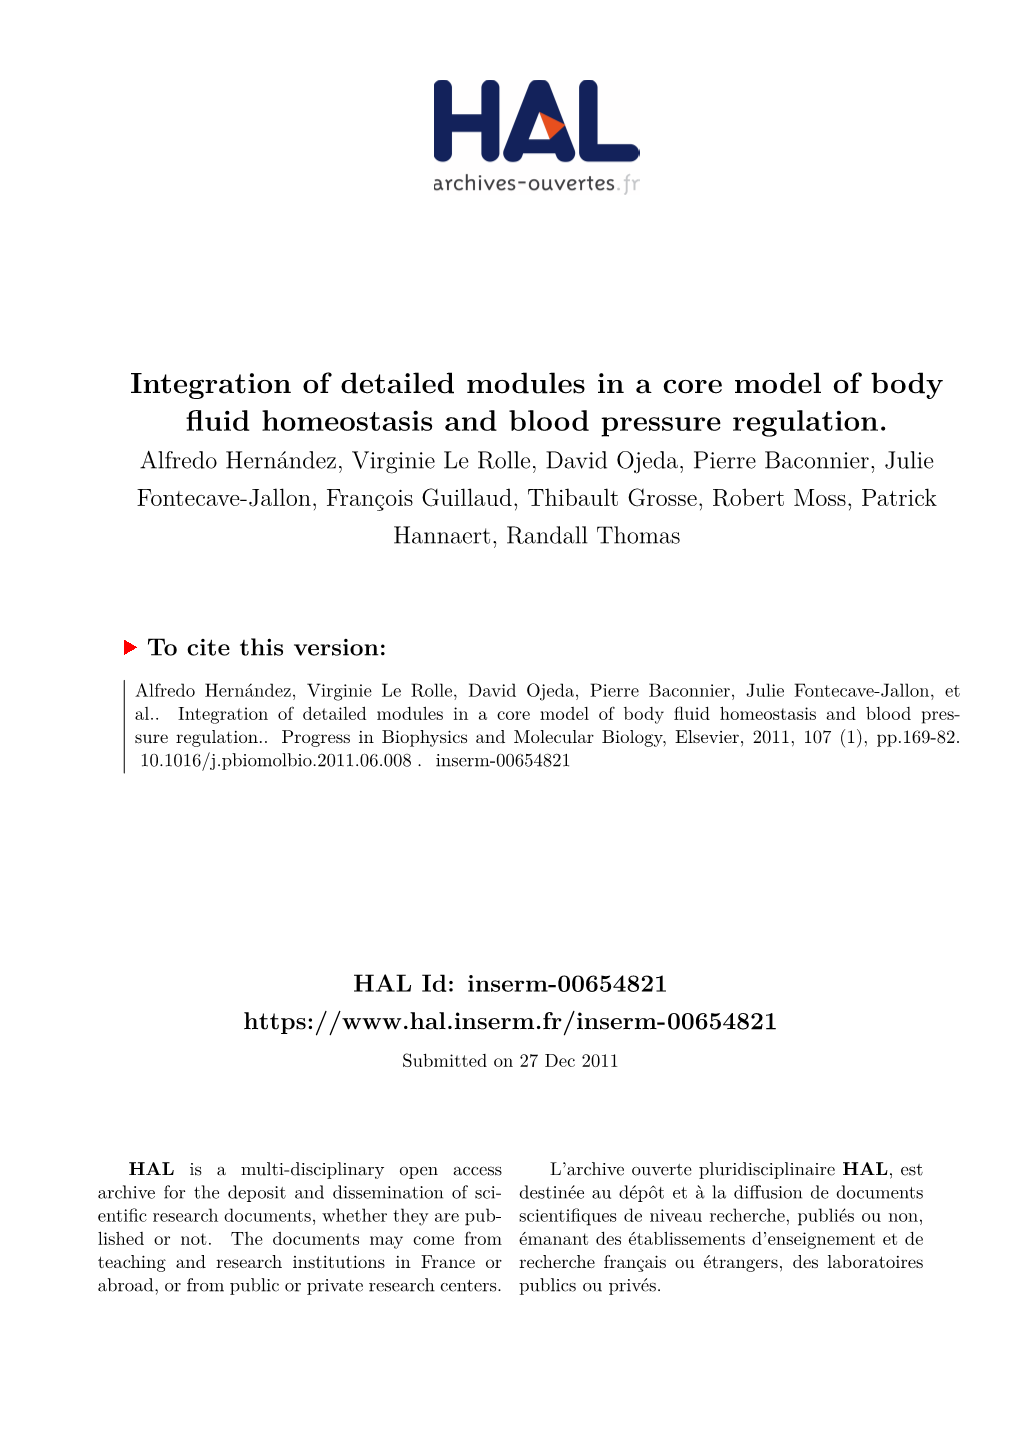 Integration of Detailed Modules in a Core Model of Body Fluid Homeostasis and Blood Pressure Regulation